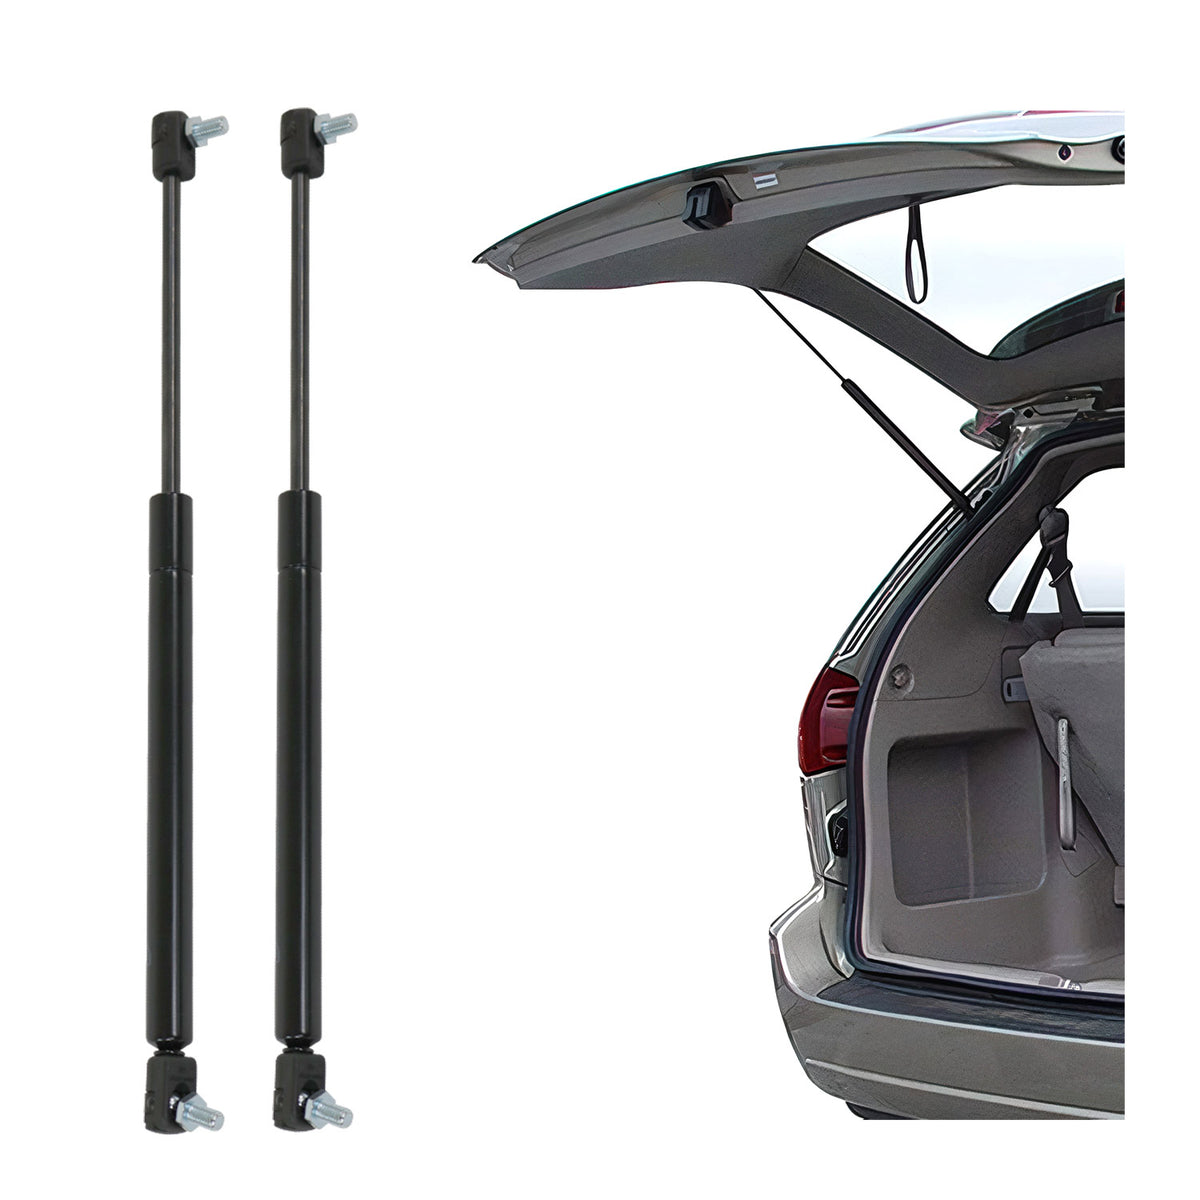 2x tailgate damper gas spring damper for BMW X5 E70 2006-2013 stainless steel